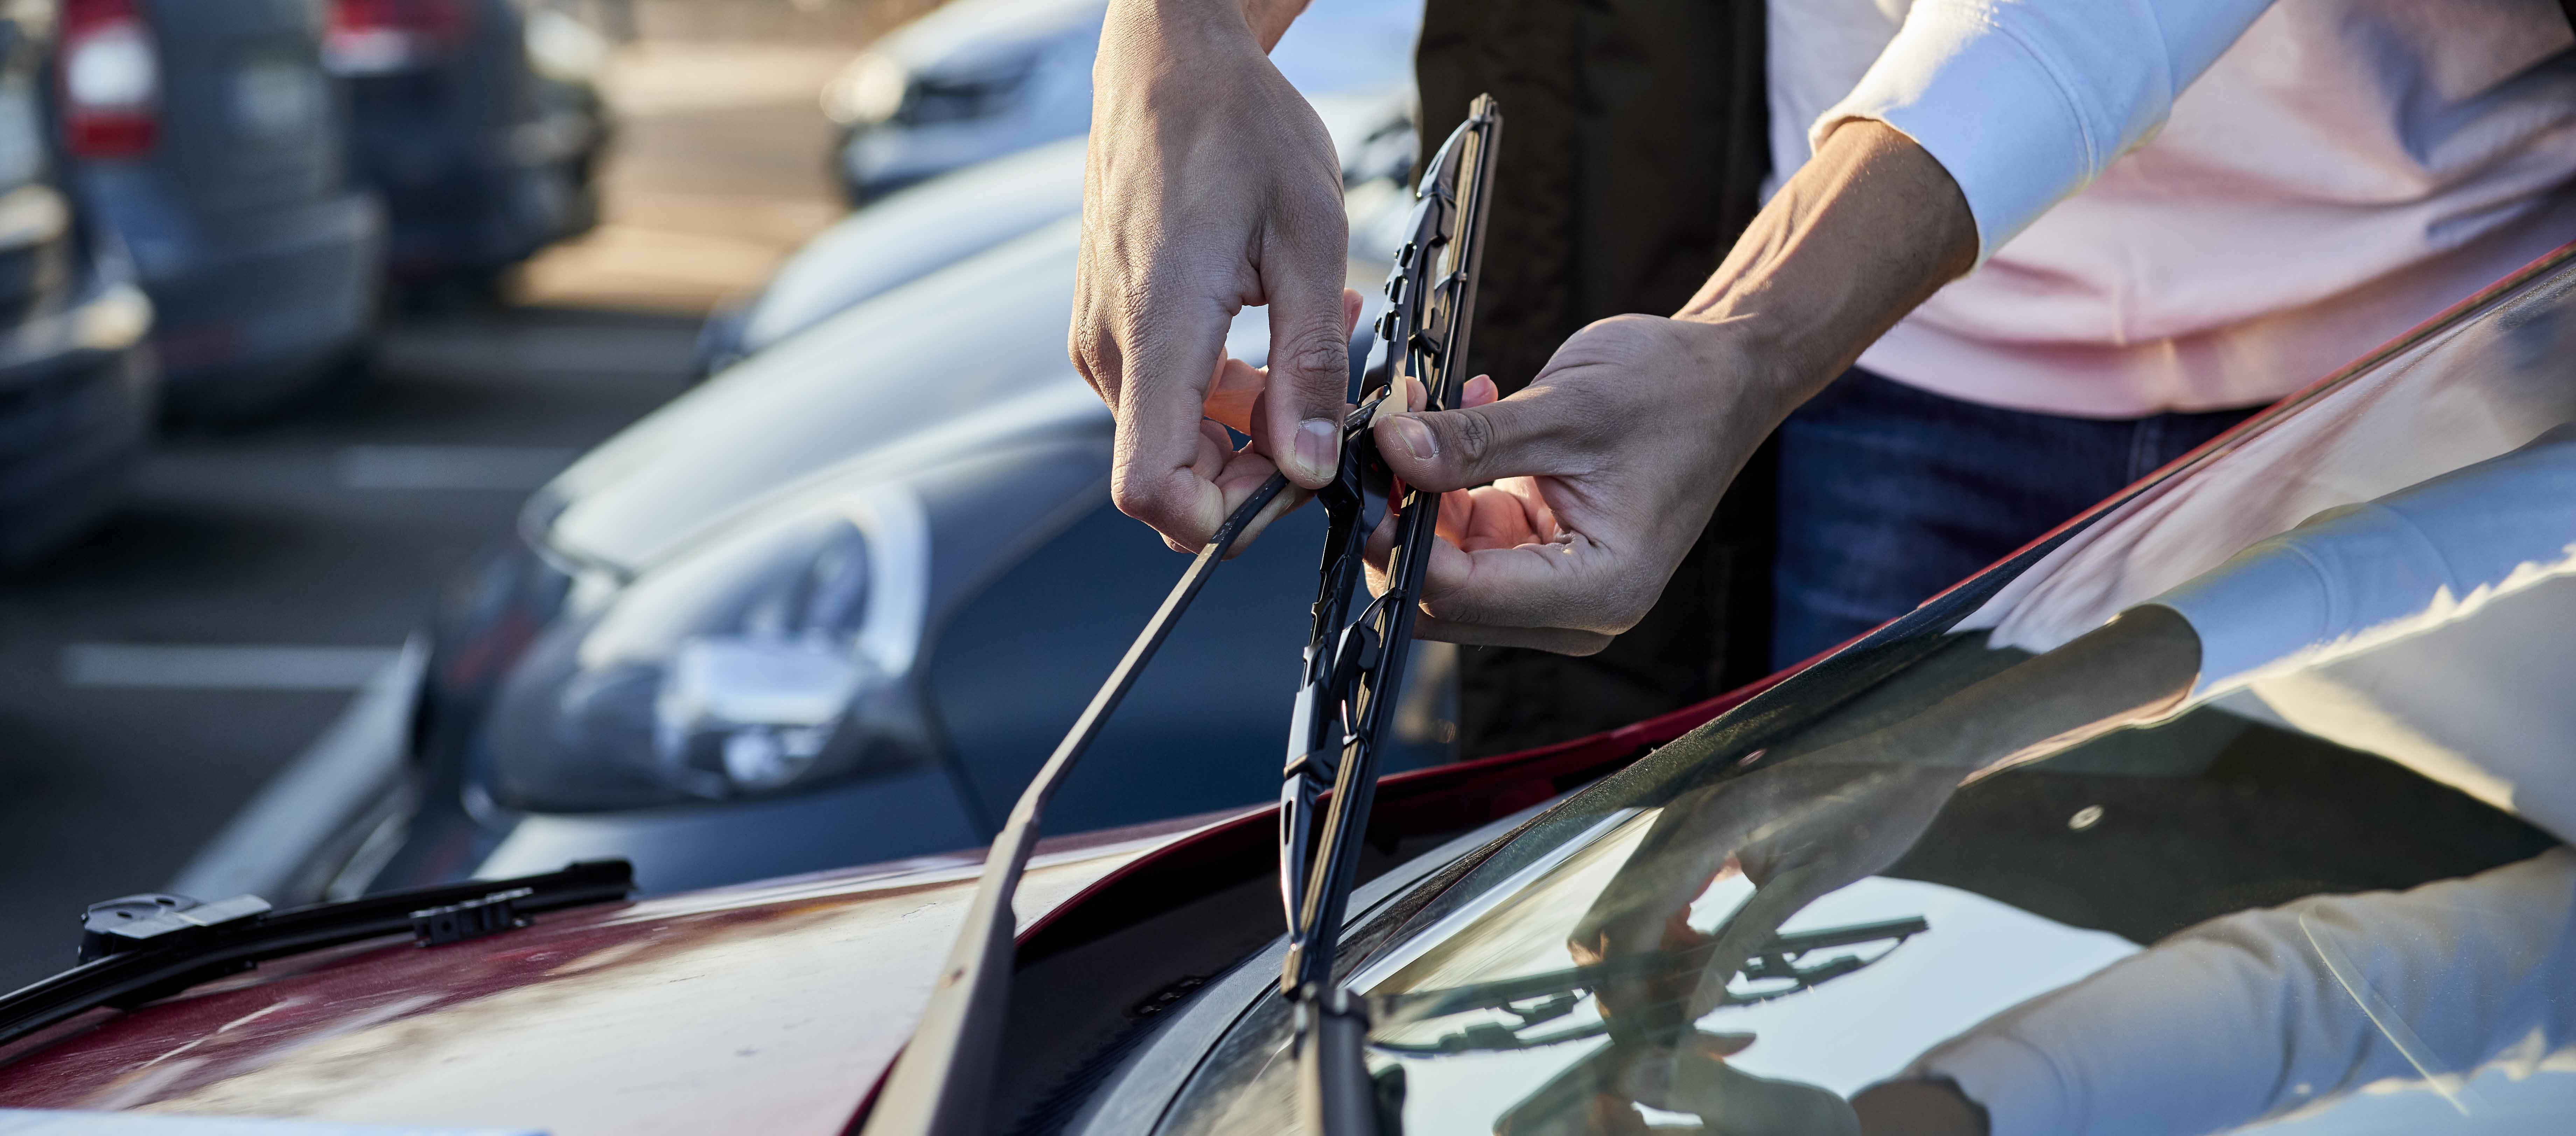 How to choose the right wiper blades